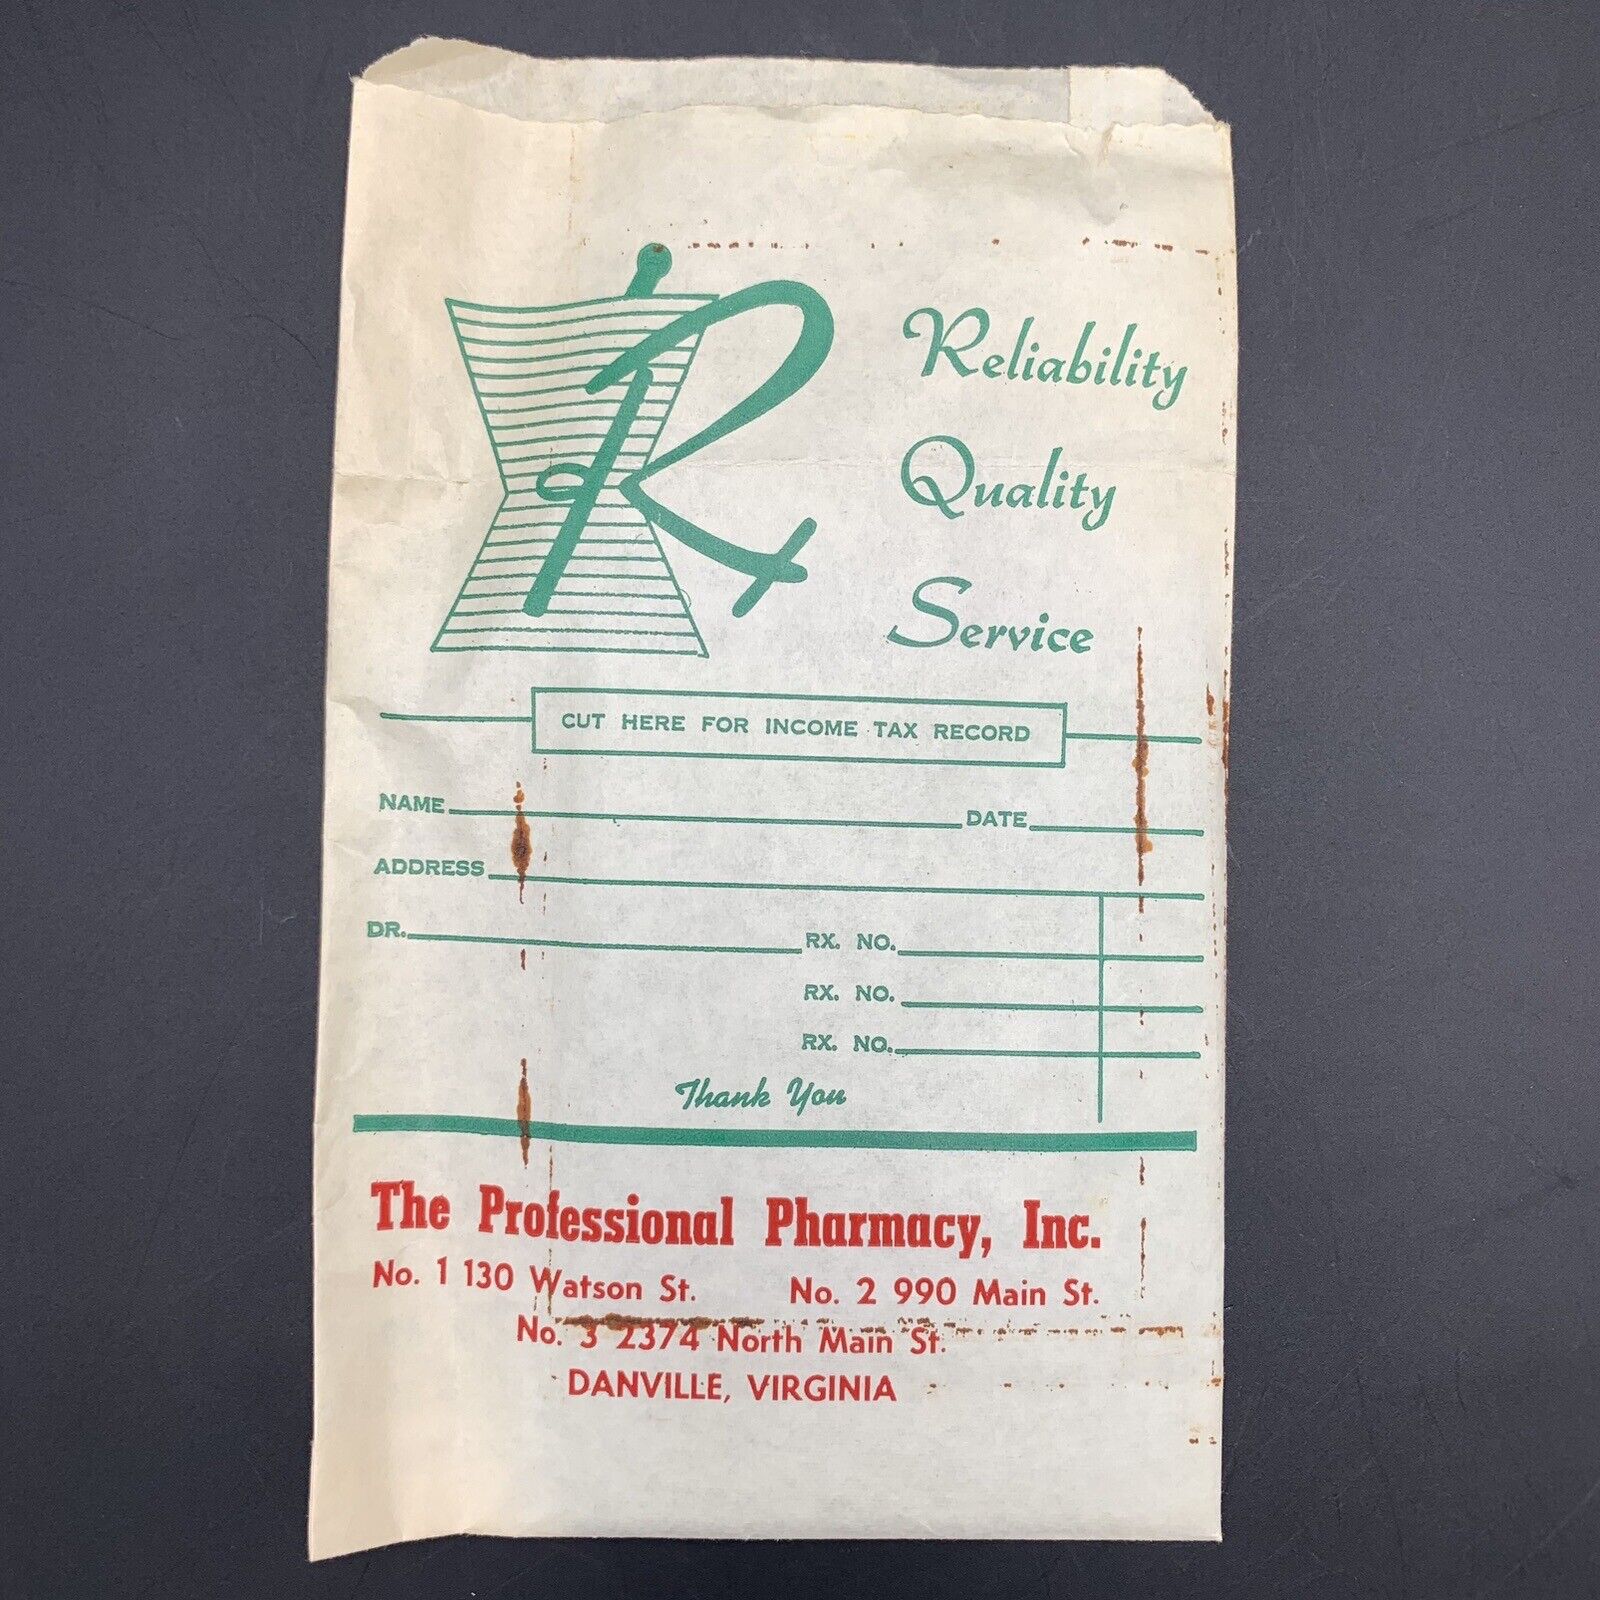 Vintage Marketing Materials For The Professional Pharmacy, Inc From Danville,VA